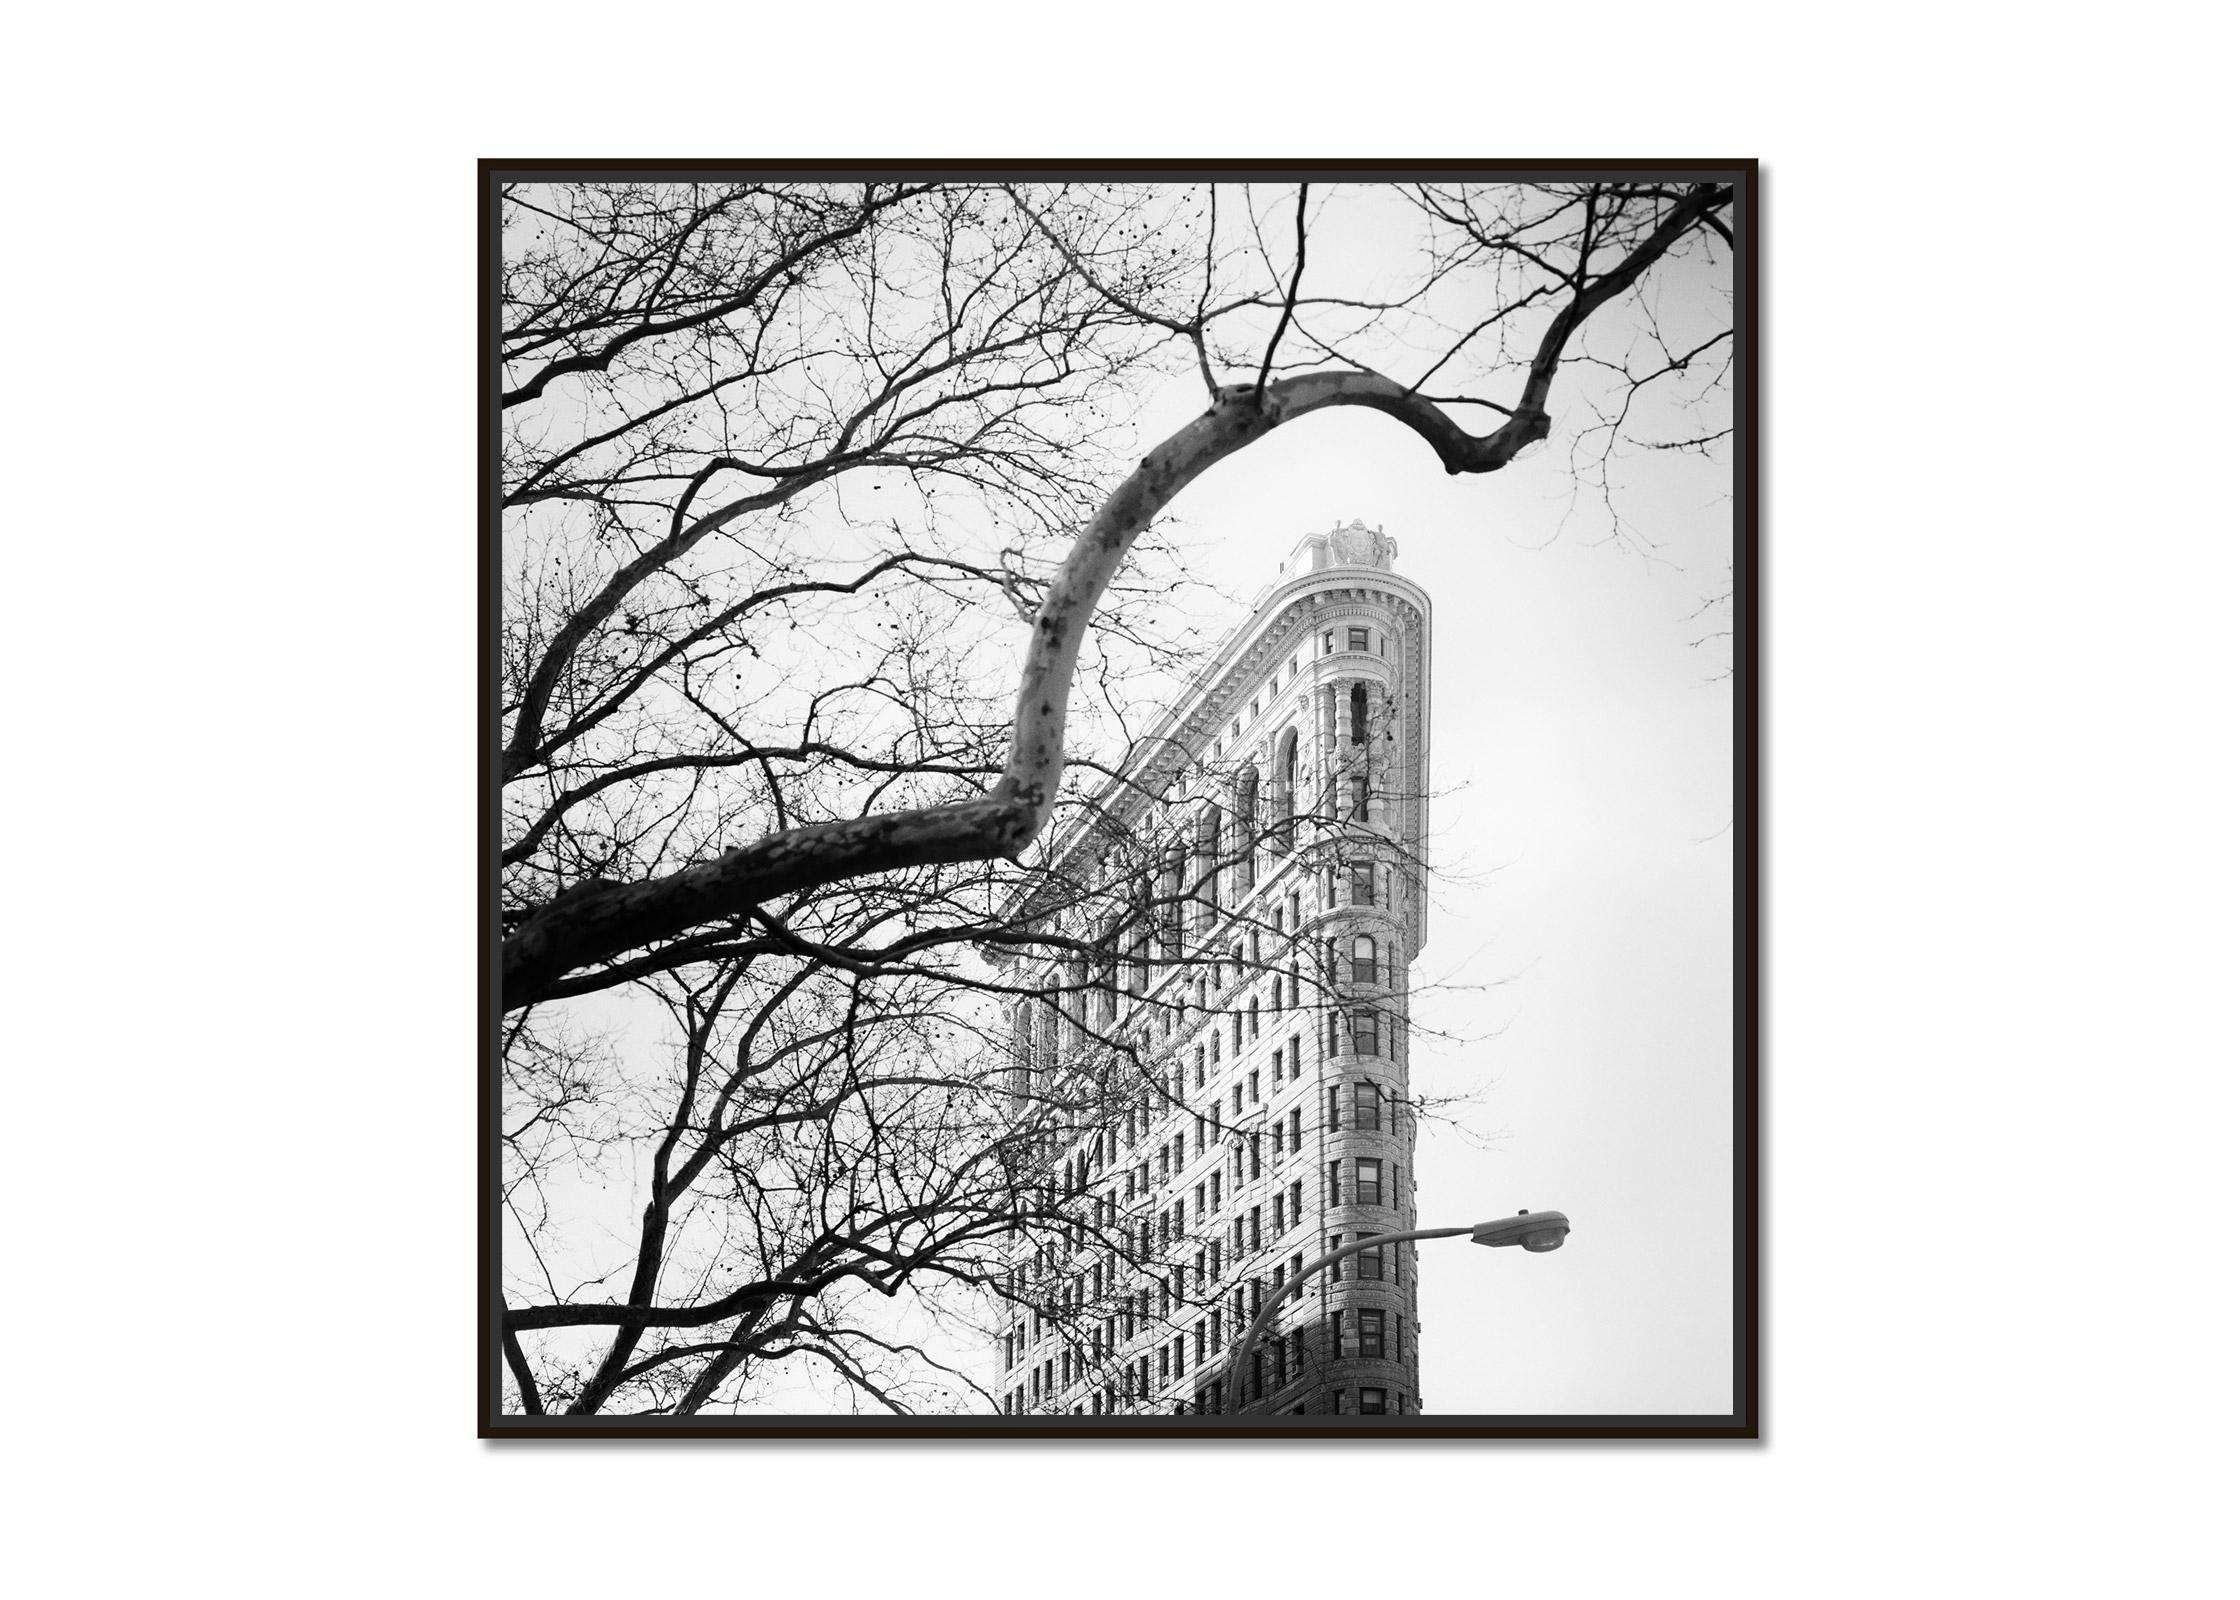 Flatiron Building, New York City, art black and white photography, architecture - Photograph by Gerald Berghammer, Ina Forstinger